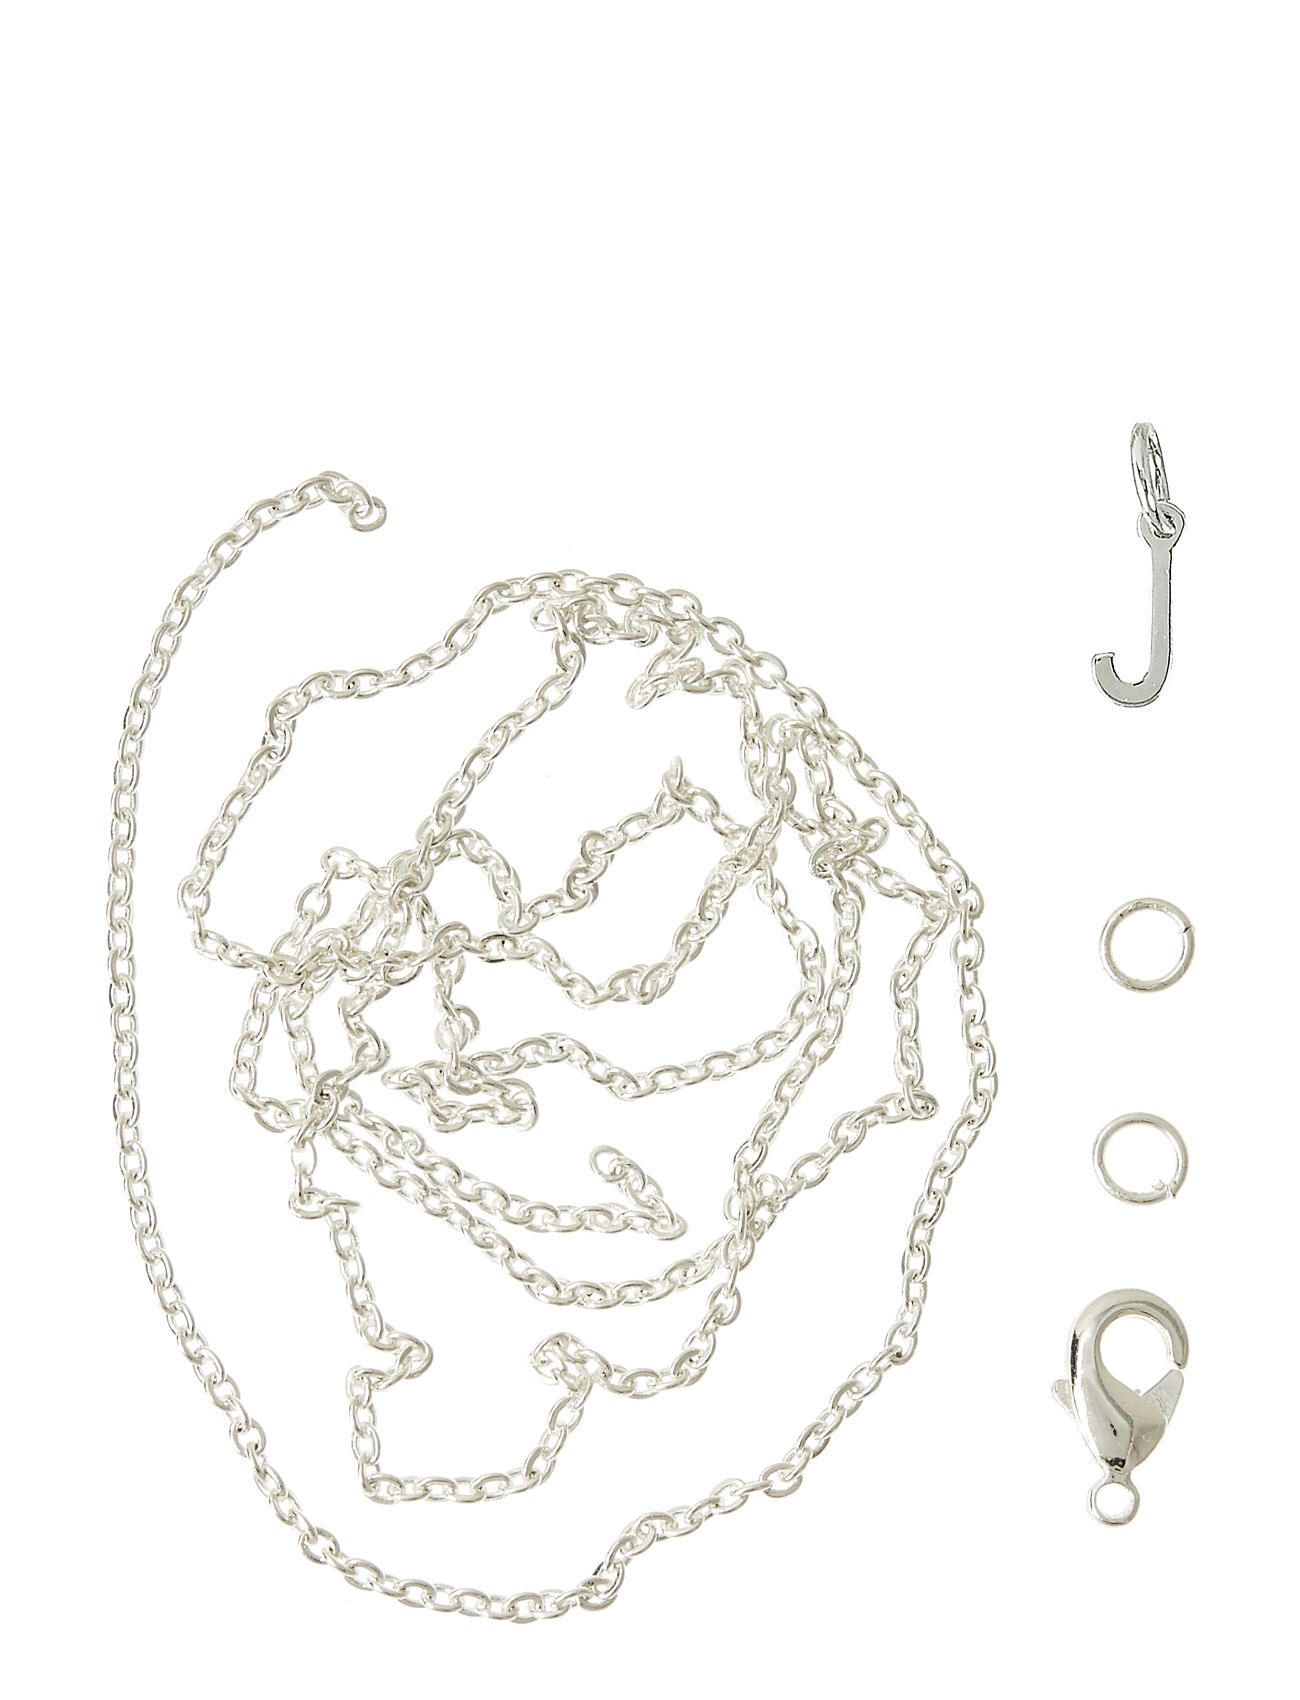 Letter J Sp With O-Ring, Chain And Clasp Toys Creativity Drawing & Crafts Craft Jewellery & Accessories Silver Me & My Box